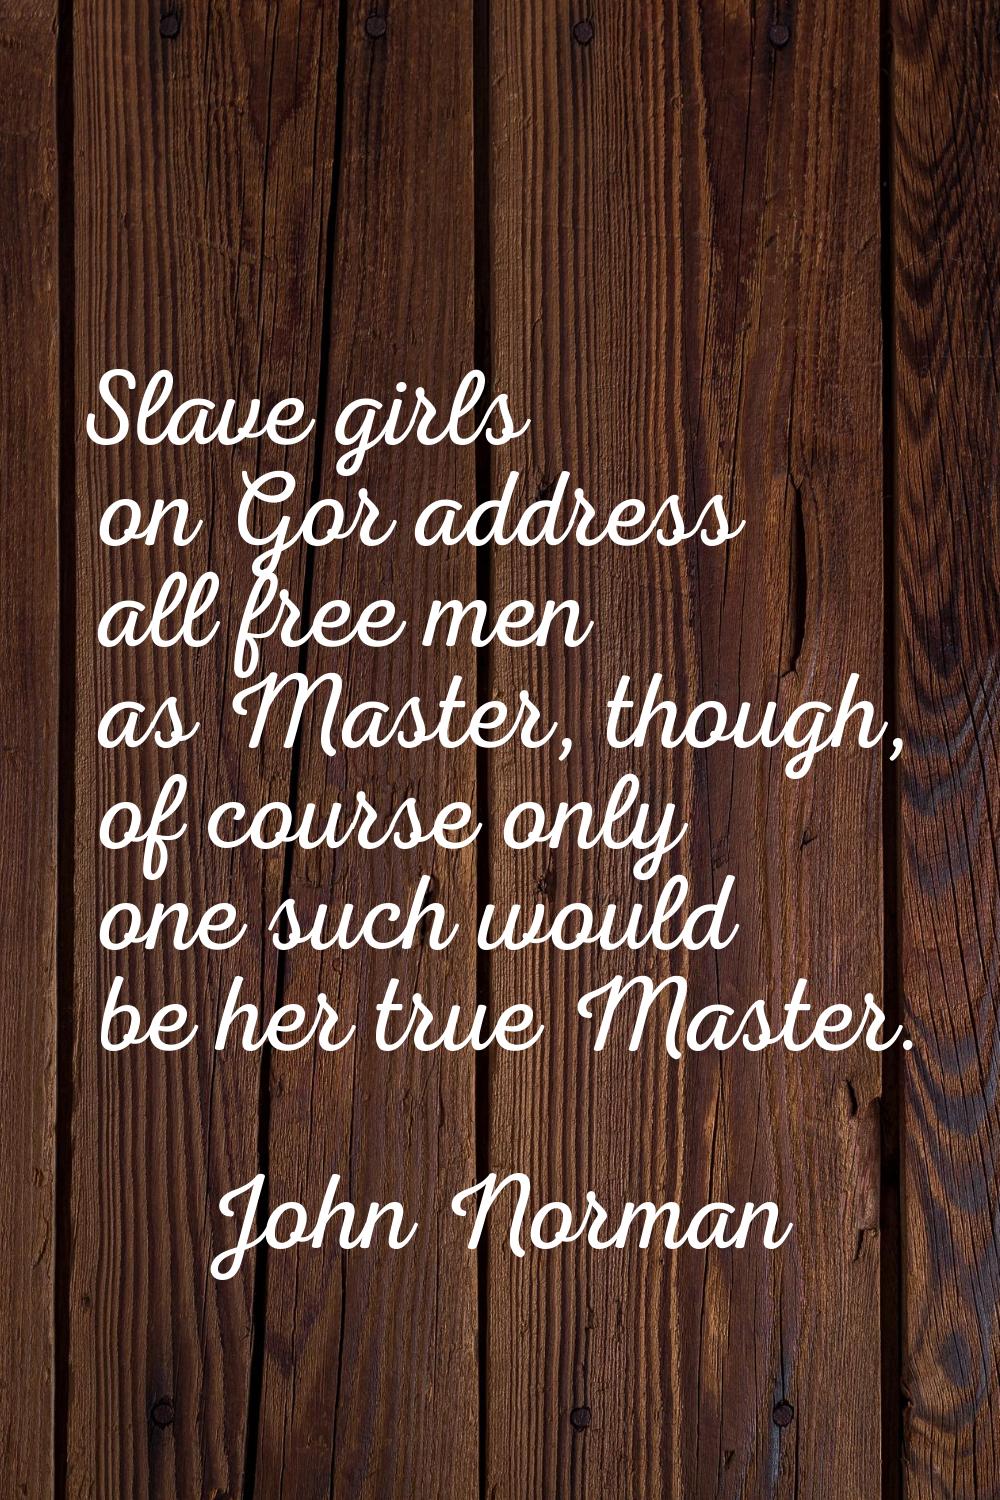 Slave girls on Gor address all free men as Master, though, of course only one such would be her tru